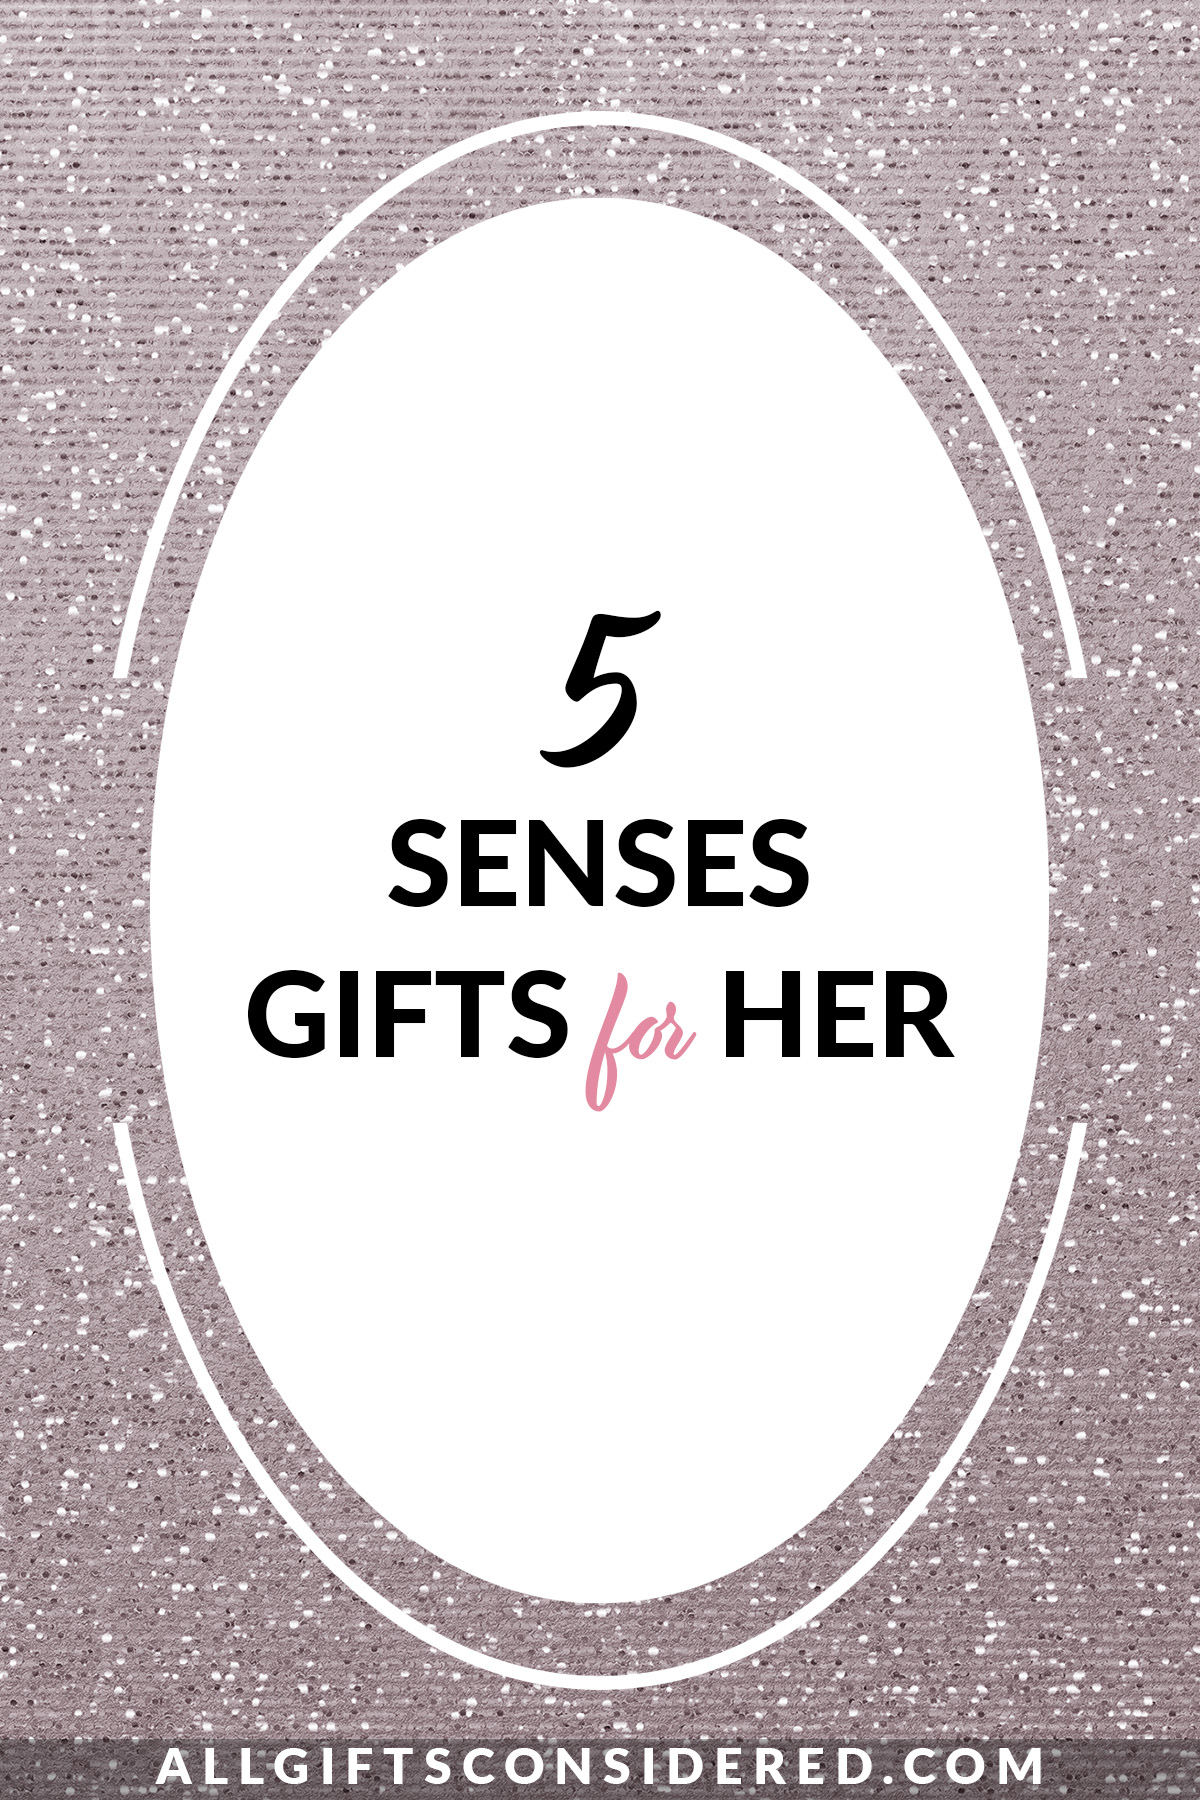 5 senses gift ideas for her - feature image